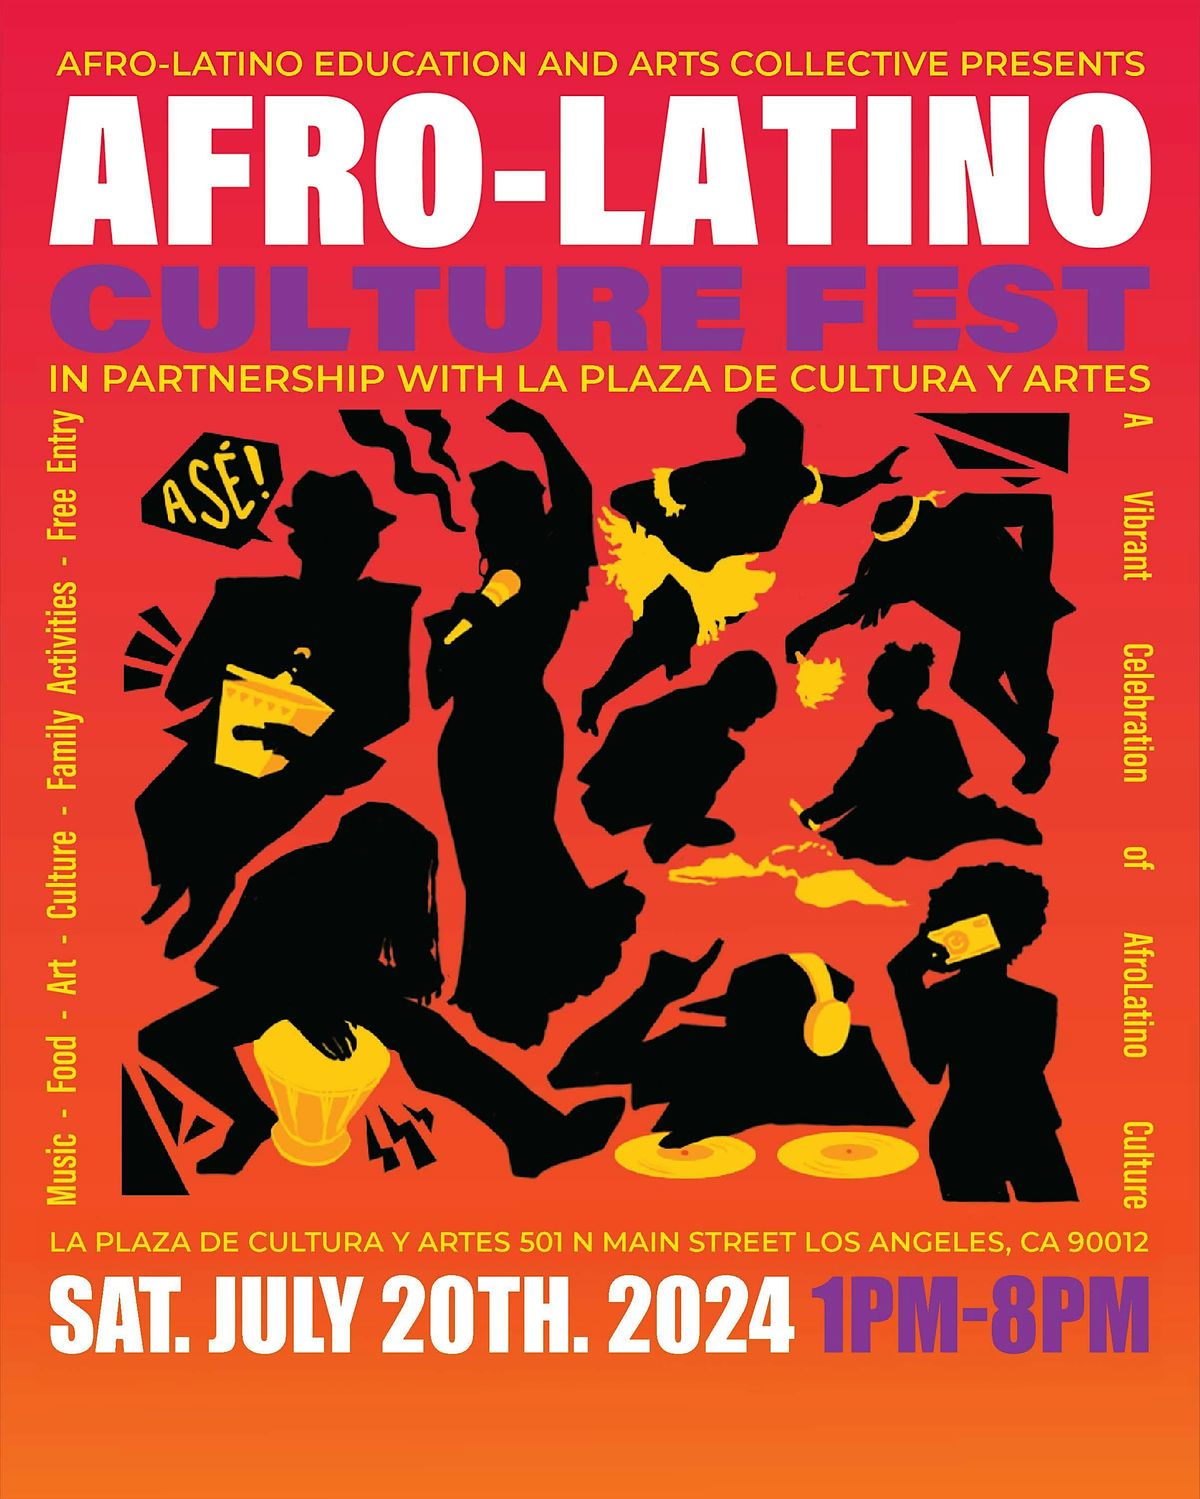 2nd Annual Afro-Latino Culture Fest-Los Angeles